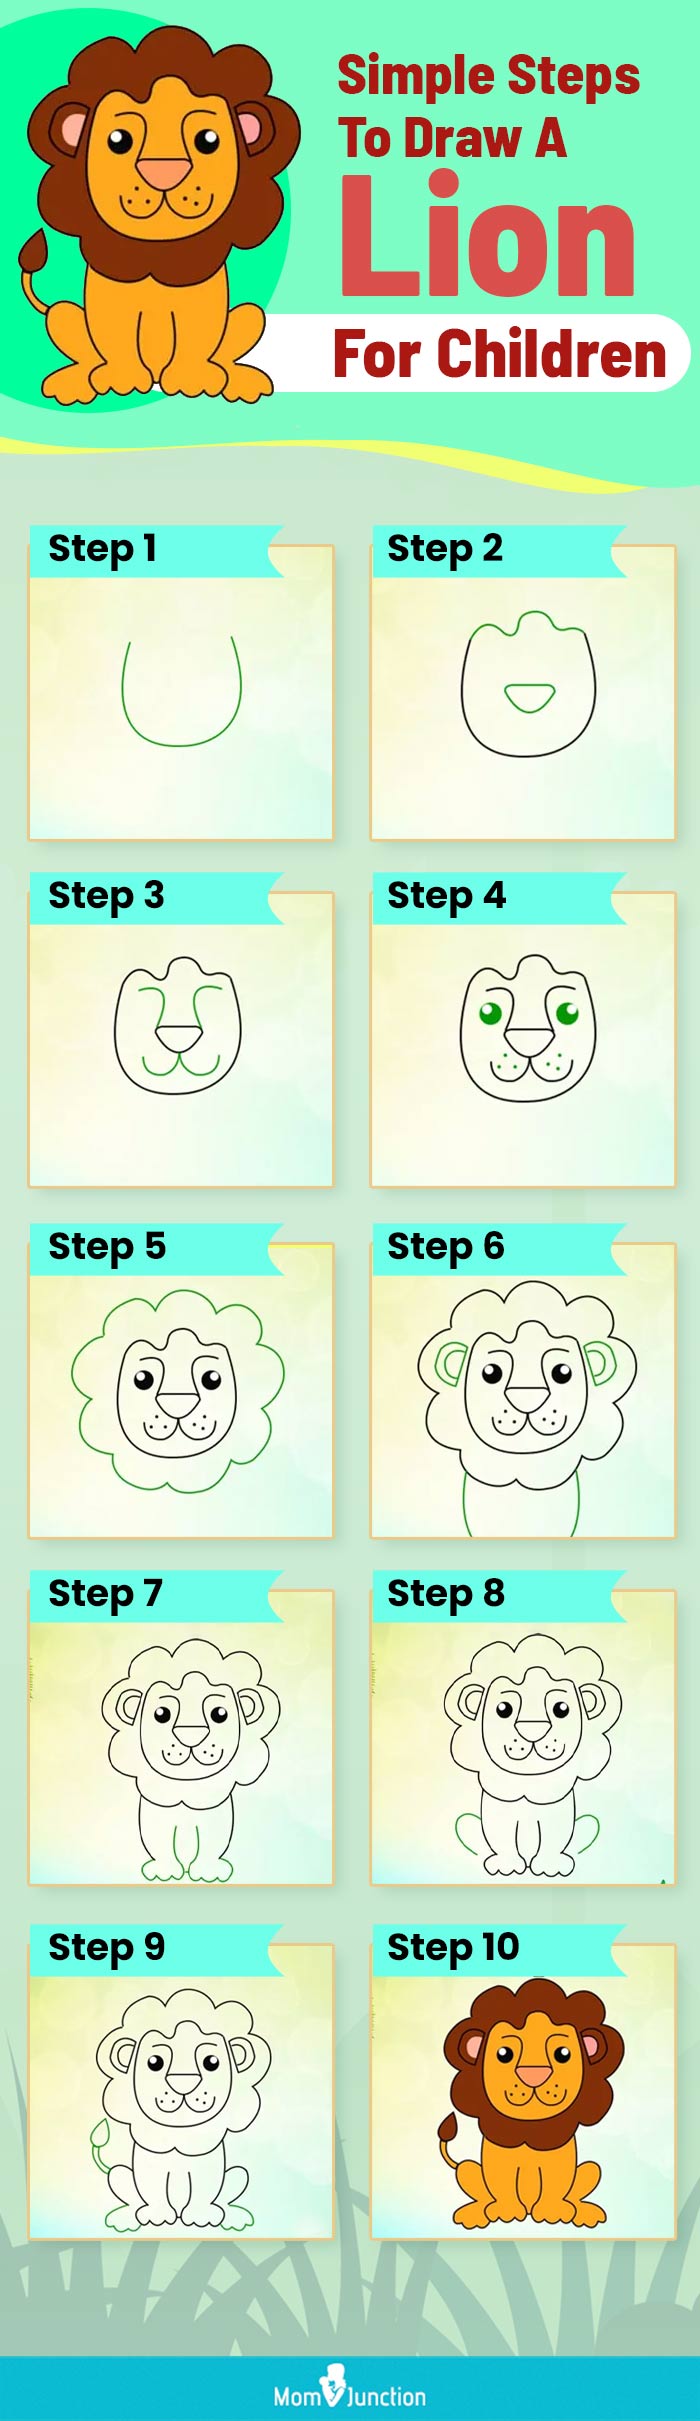 simple steps to draw a lion for children (infographic)